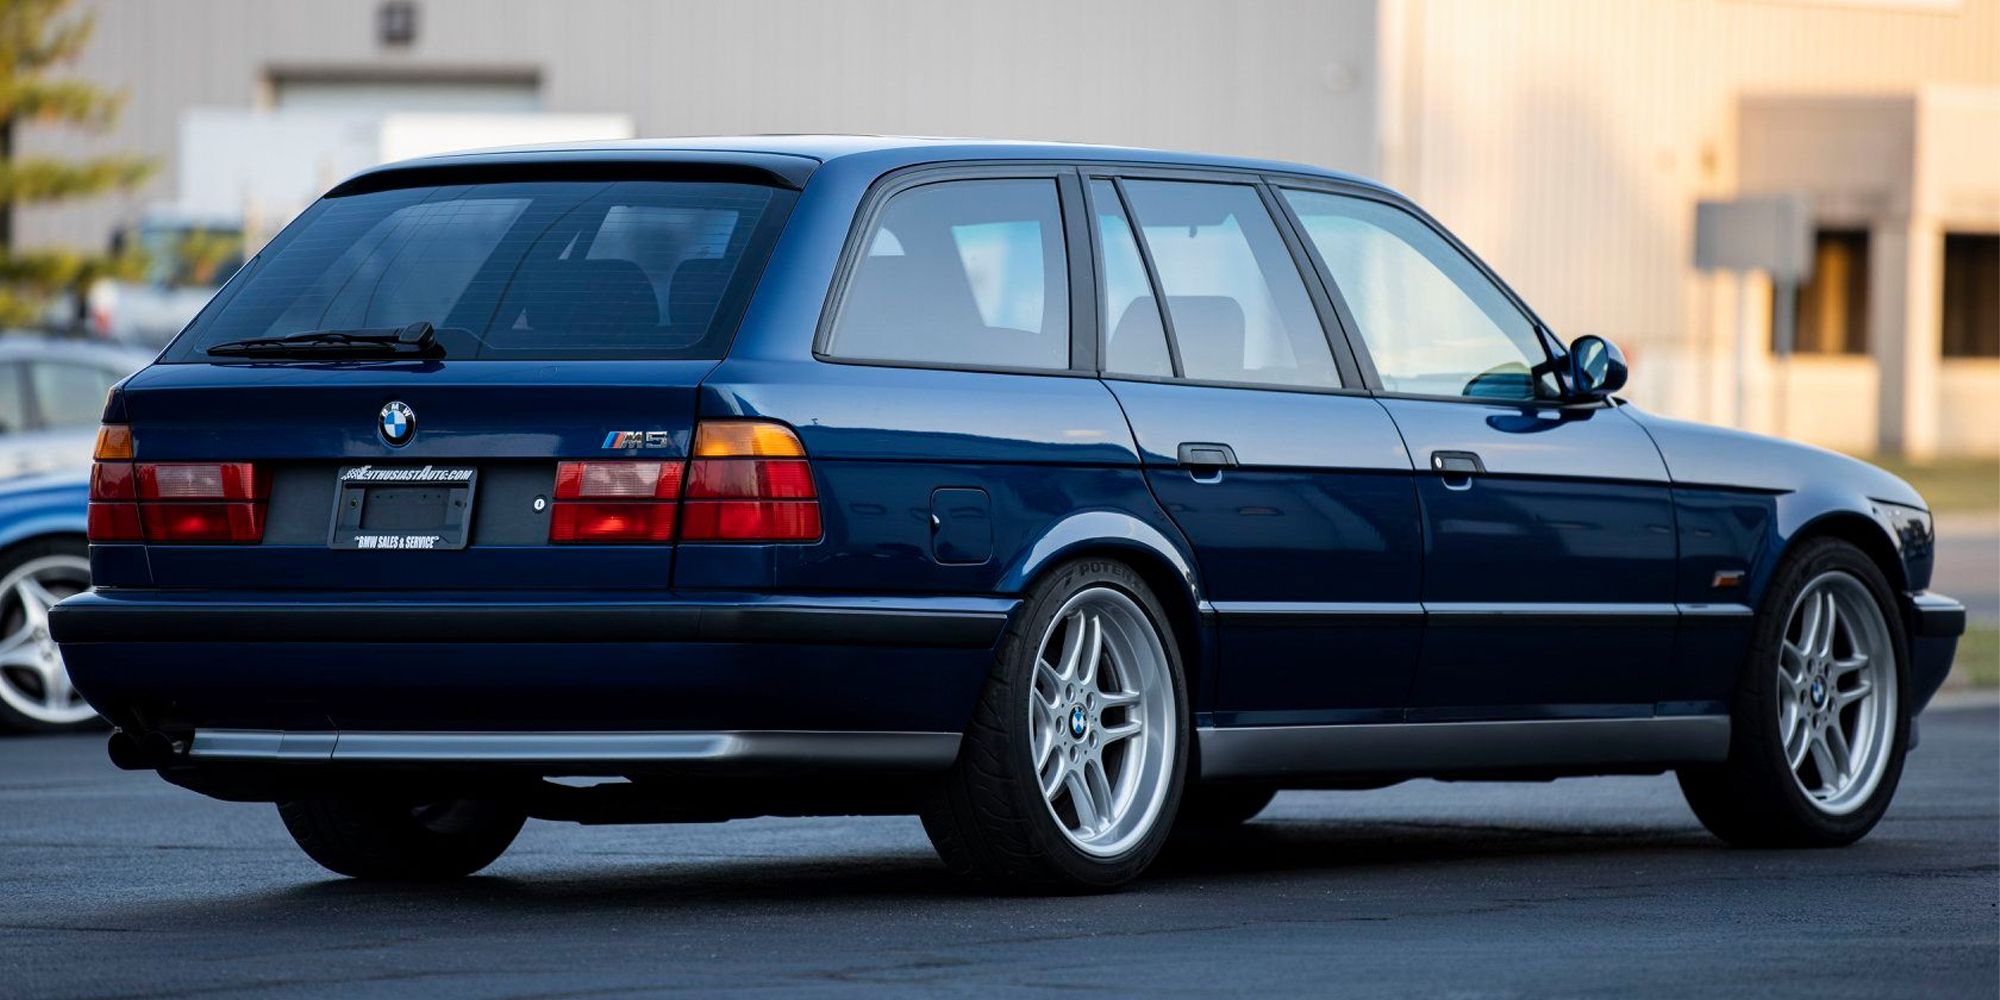 The rear of the E34 M5 Touring